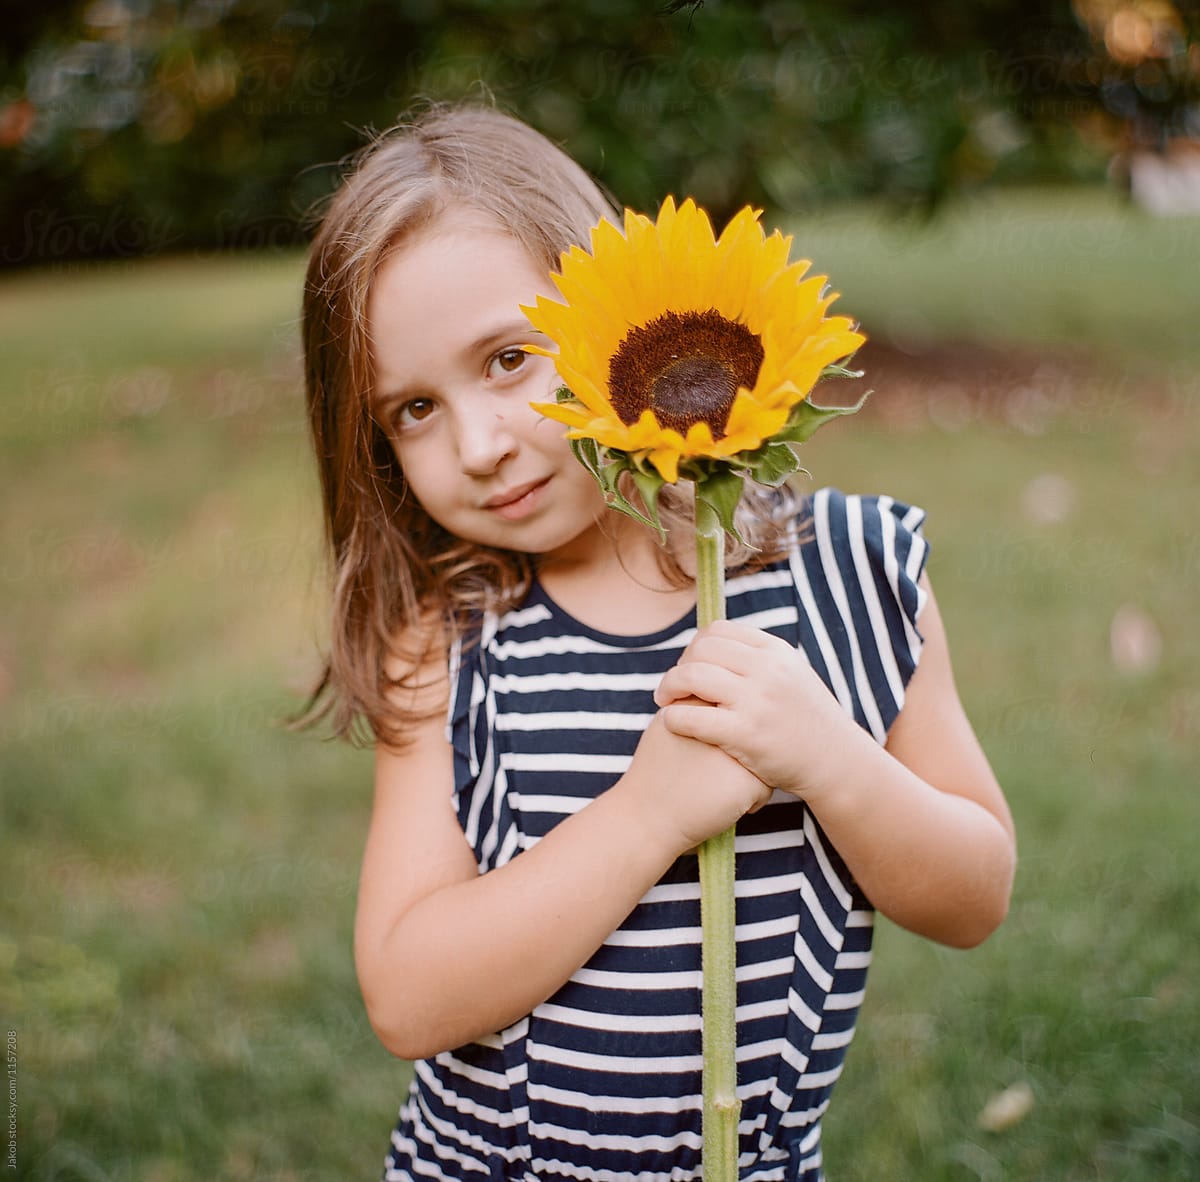 Cute Young Girl With A Big Sunflower By Stocksy Contributor Jakob 6494